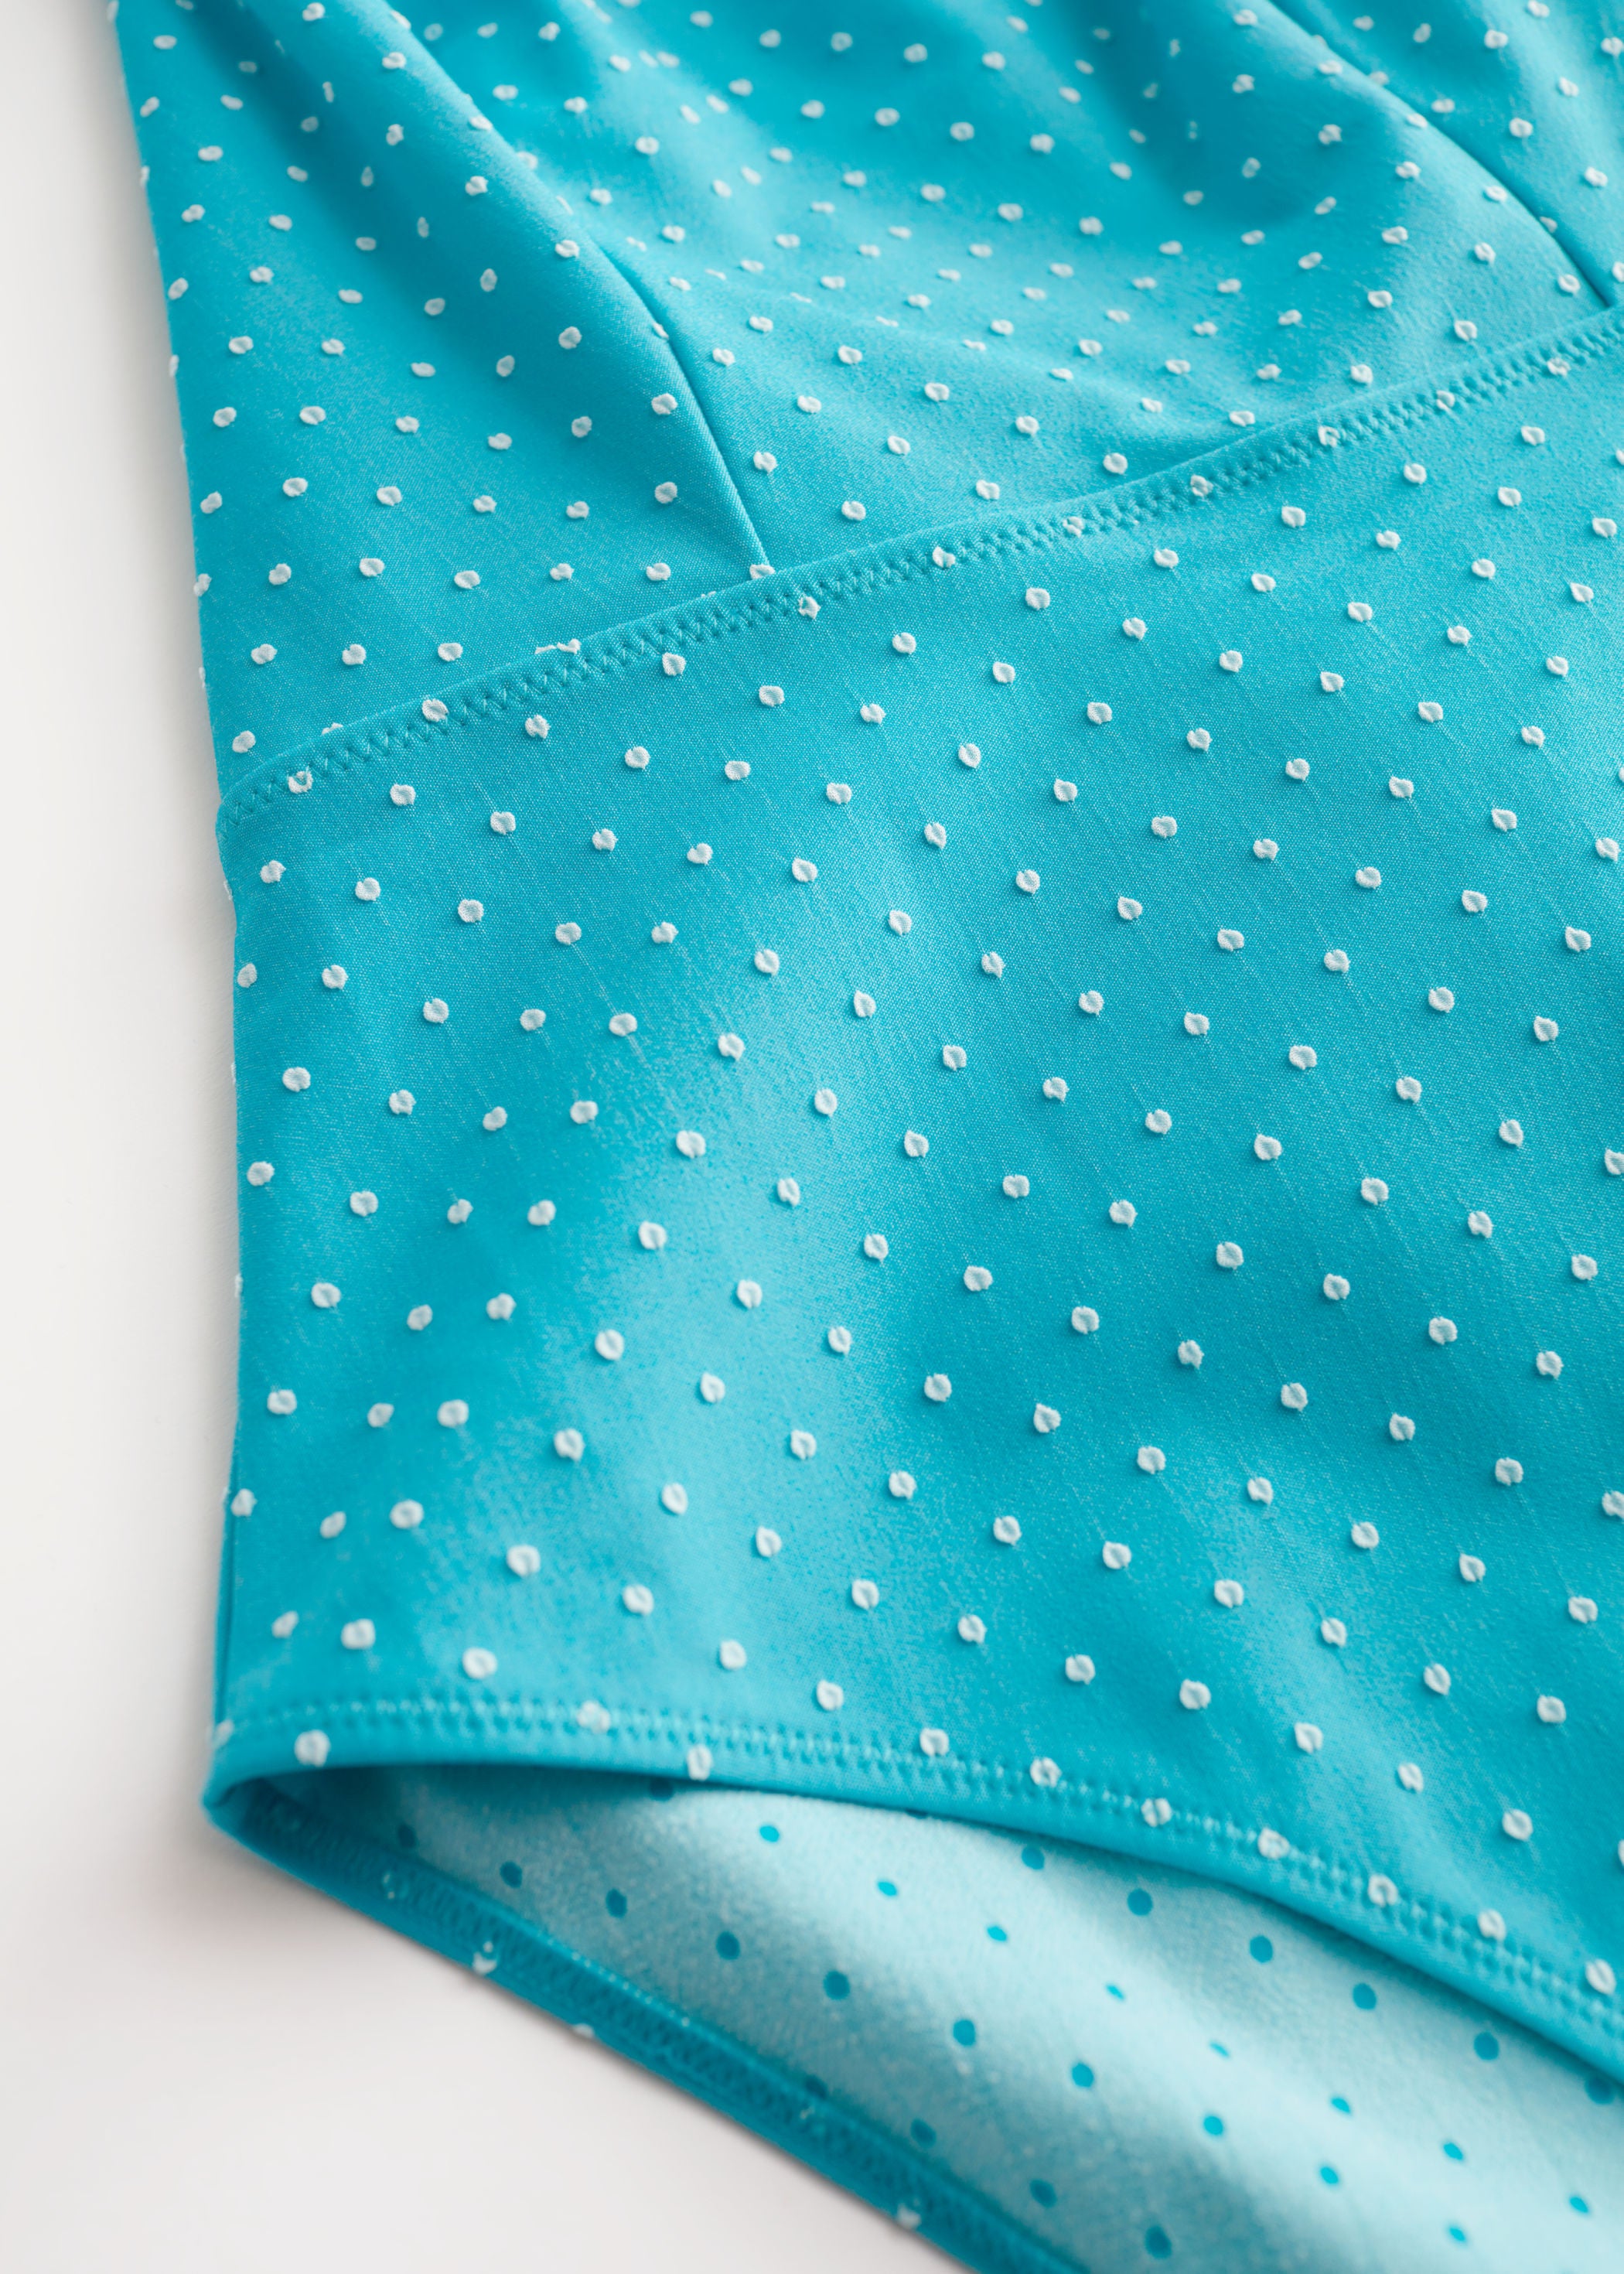 & other stories polka dot swimsuit